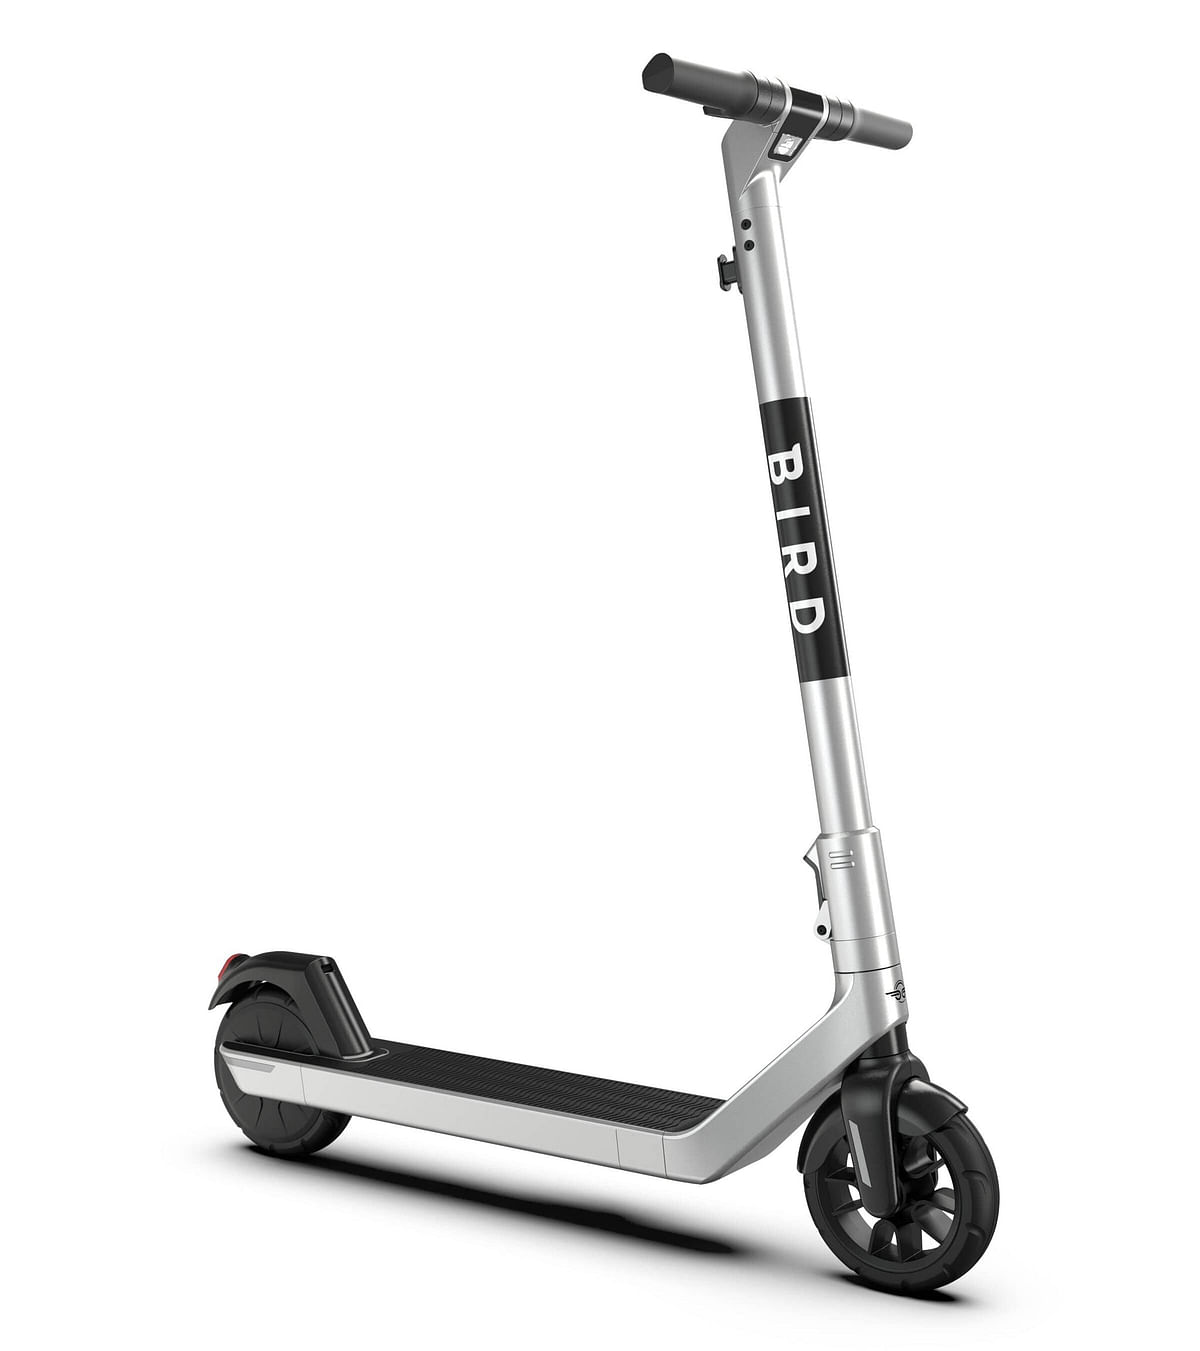 Bird AIR Scooter 8.0" - Folding Electric Scooter, Portable Compact Stylish Trendy, Fast 25kph, Bluetooth, Battery Operated, LED Lights, Splash Resistant, Flat-Free Wheels, Electronic Brake - Silver